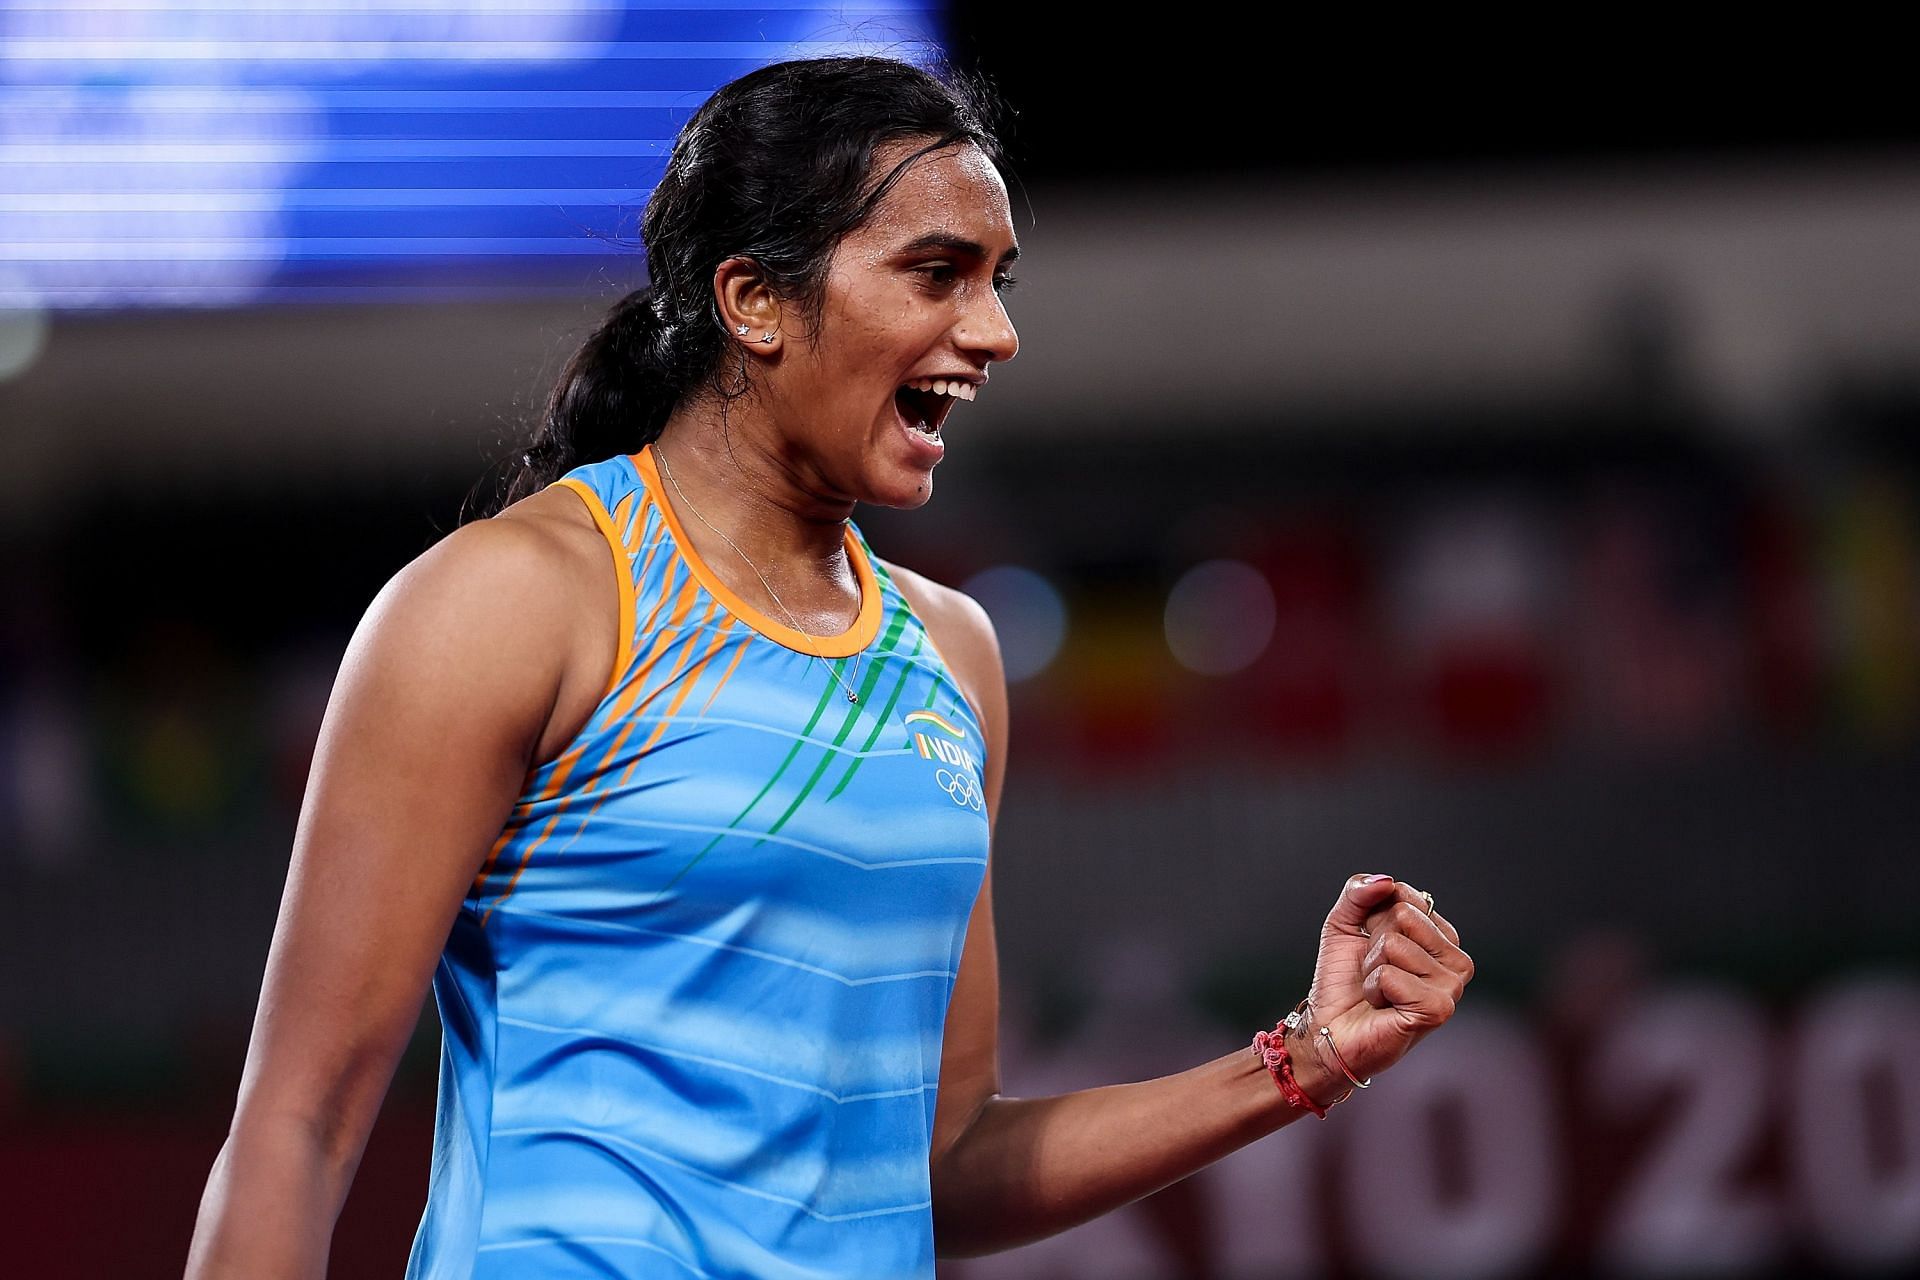 PV Sindhu celebrates a point at the Tokyo Olympics (Image courtesy: Getty Images)